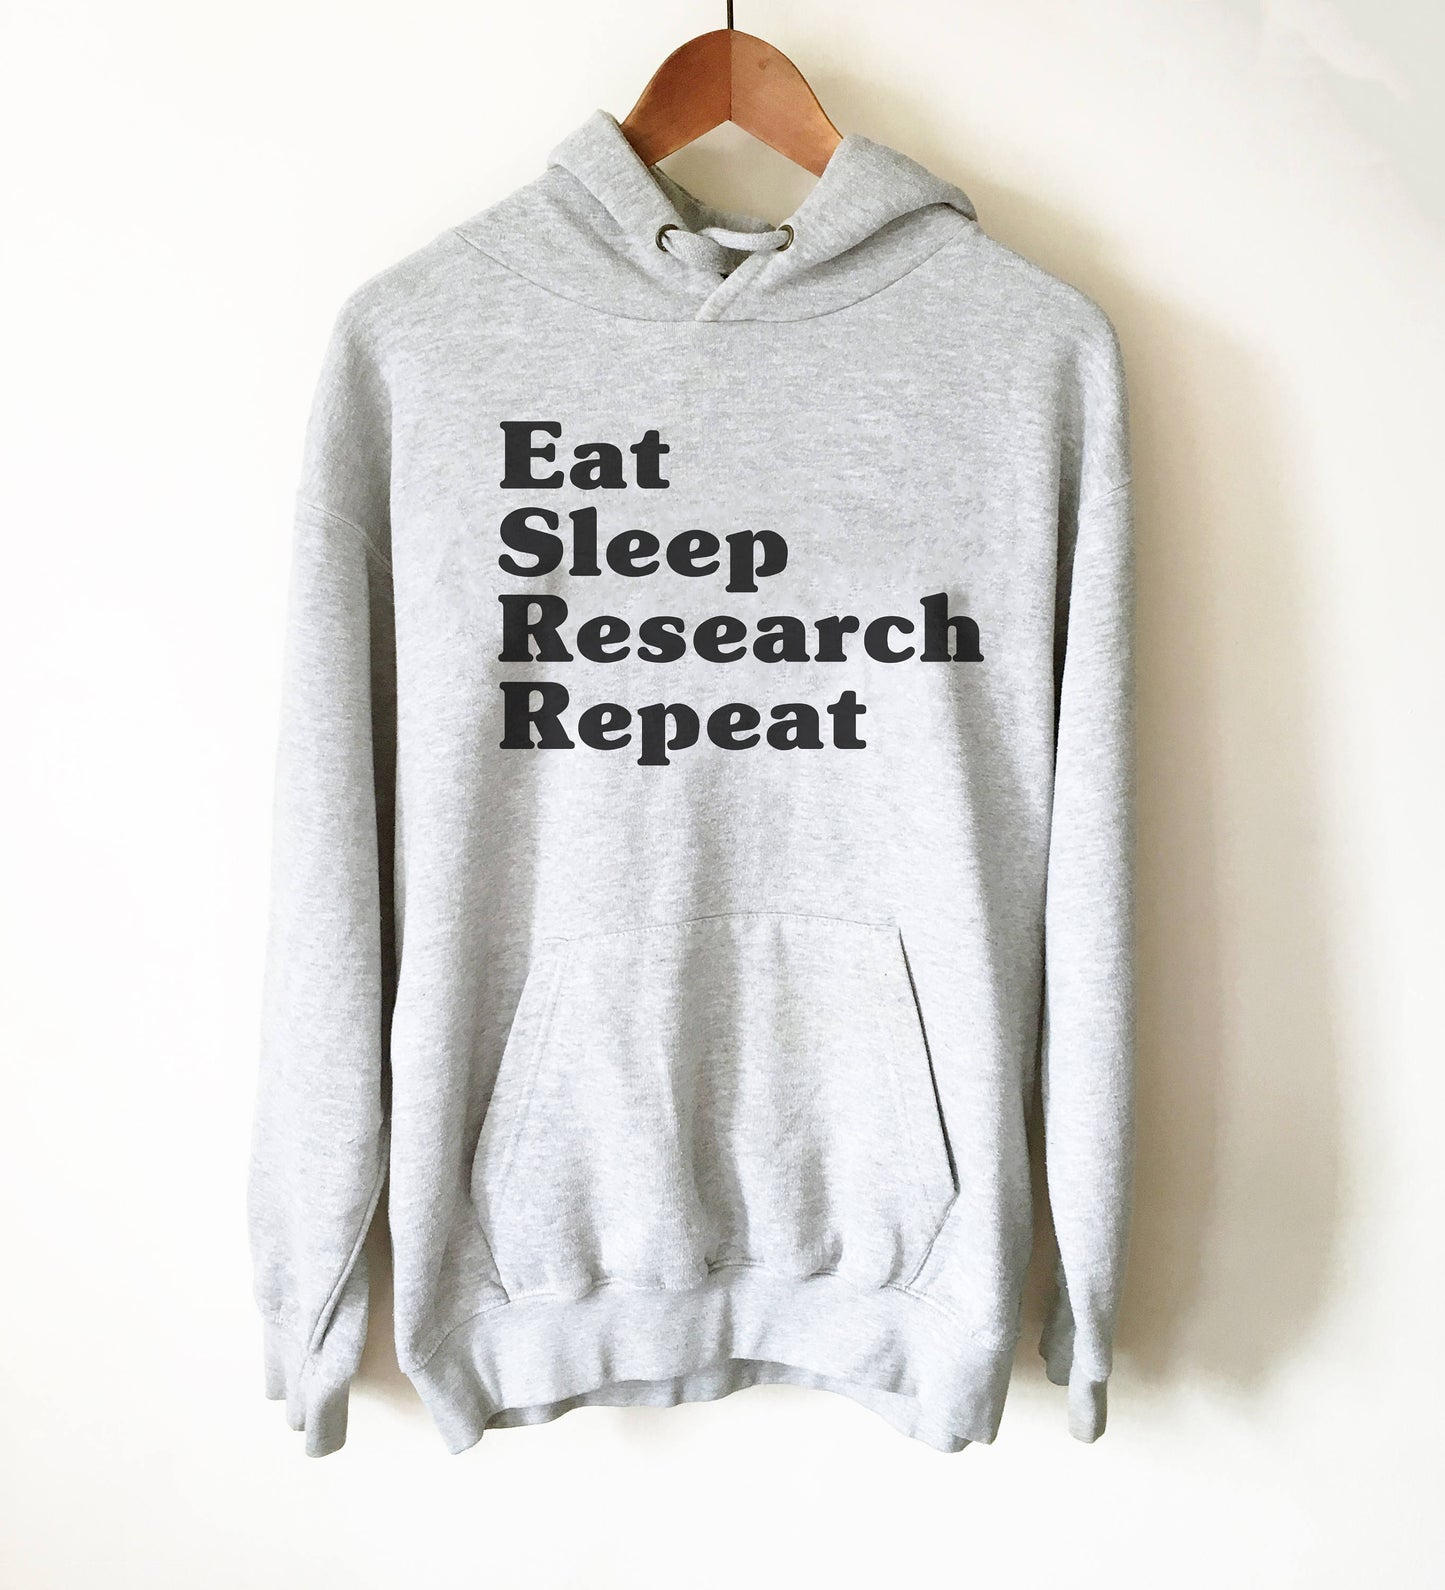 Eat Sleep Research Repeat Hoodie - Phd Gift, Doctorate Degree, Phd Student, College Student Gift, Phd Shirt, Professor Shirt